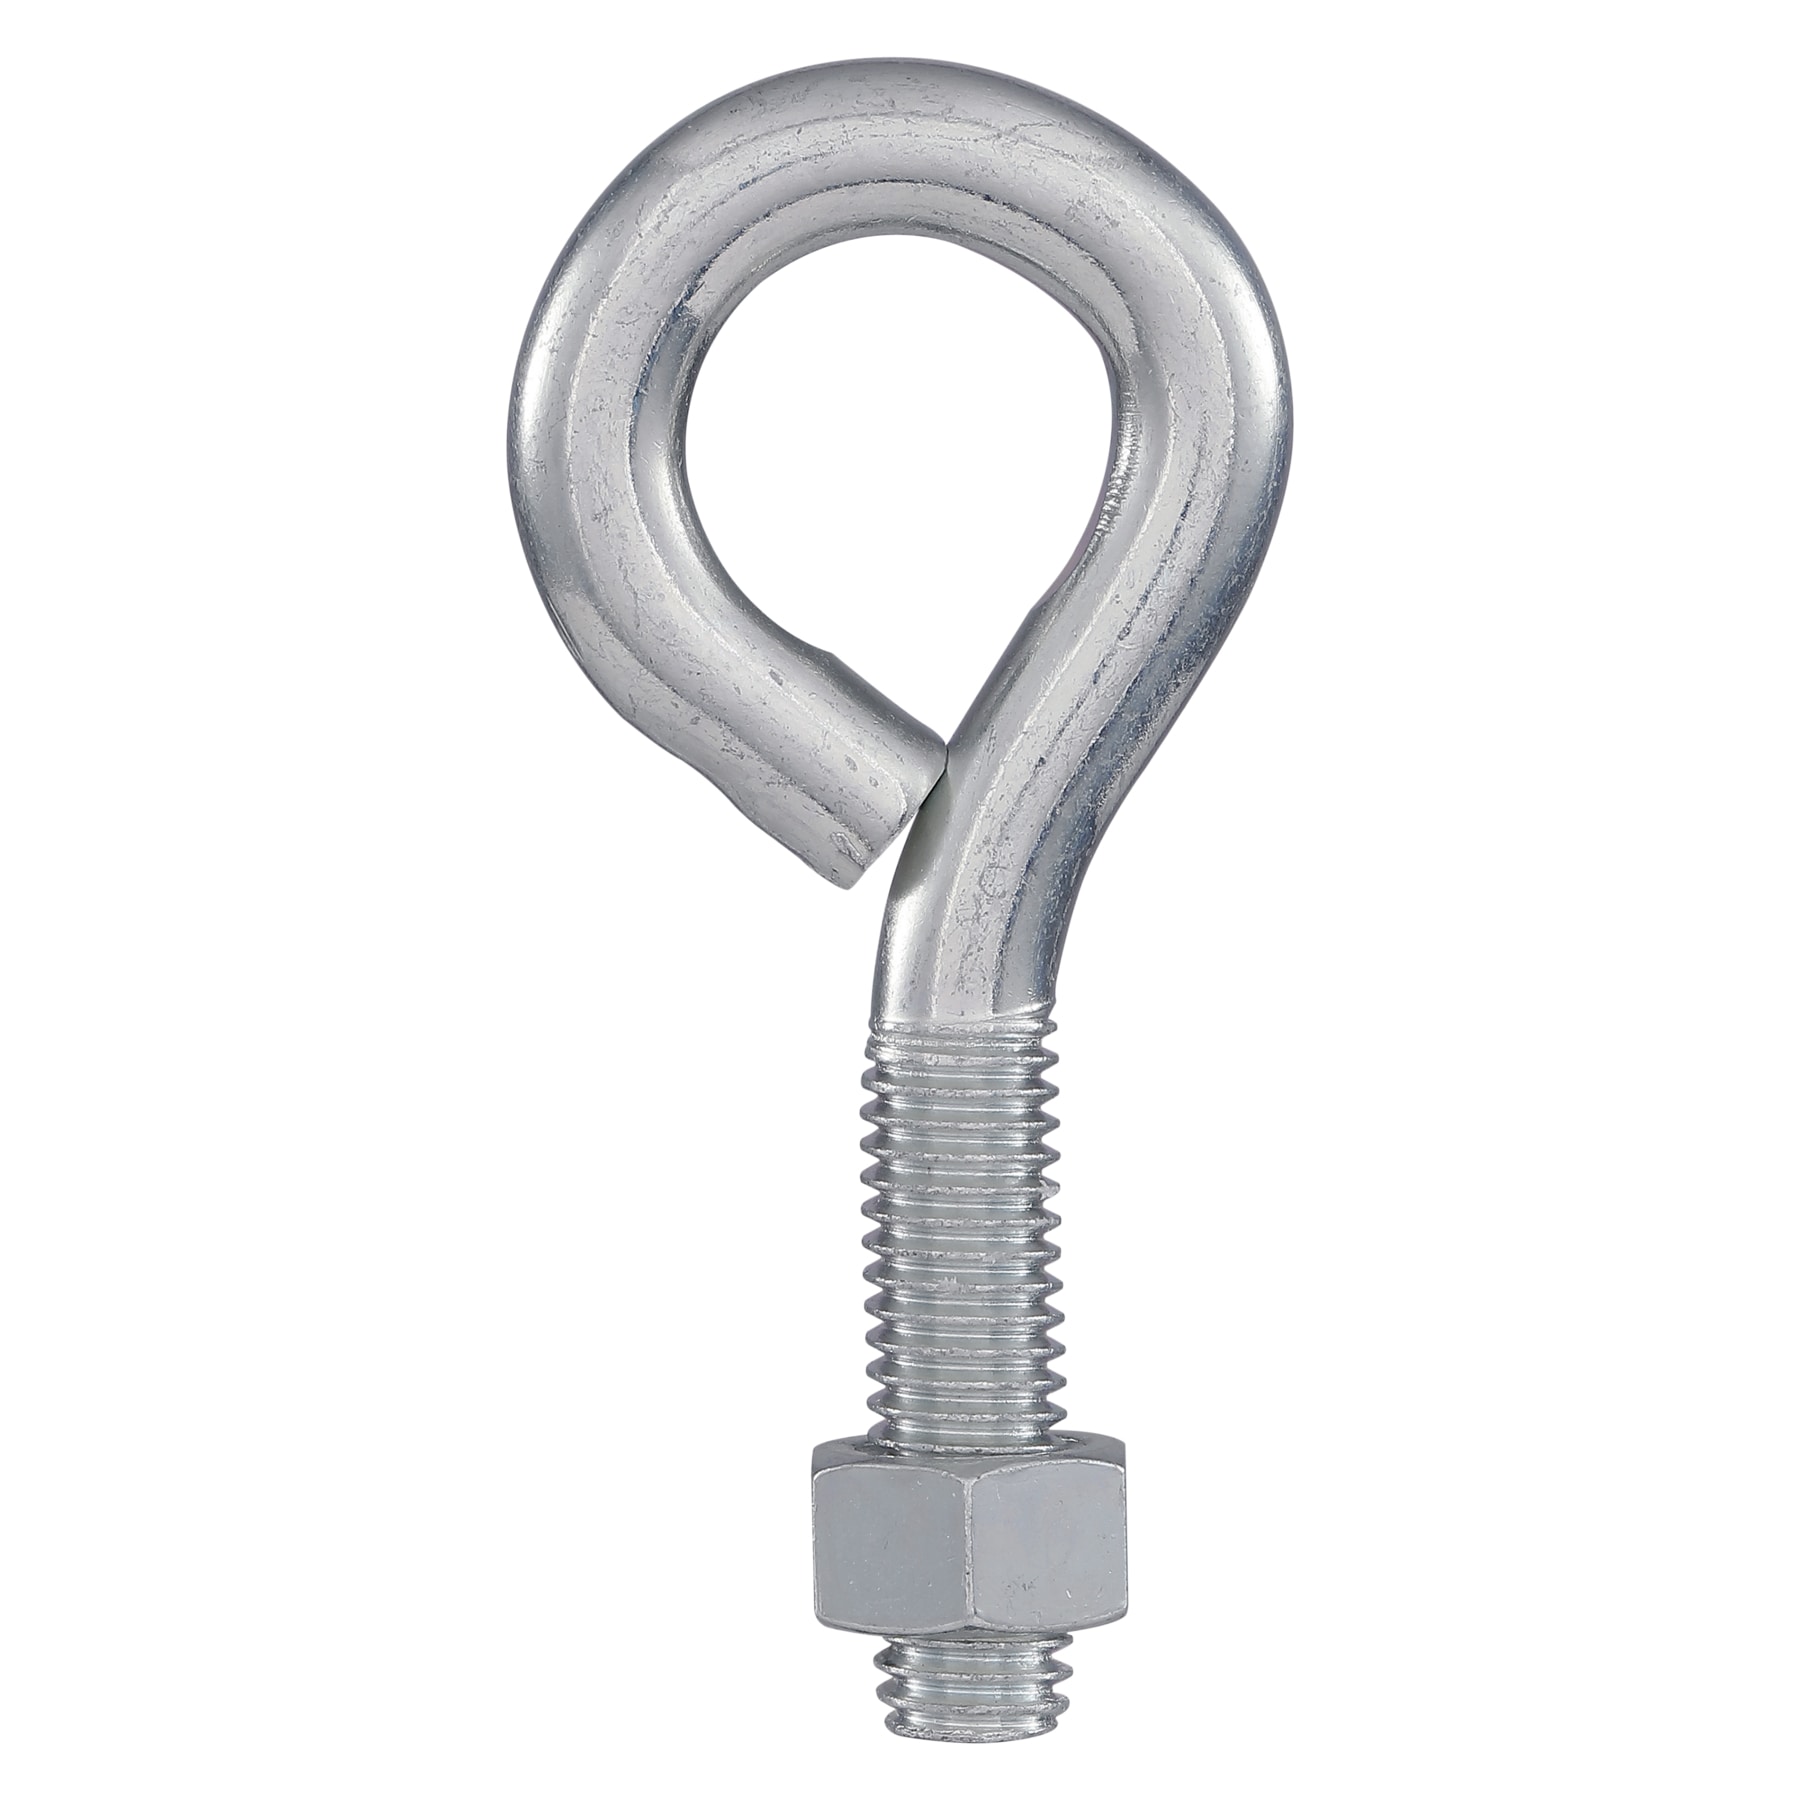 Chain Bolts: National Hardware 4 Inch Industrial Chain Bolt ON SALE